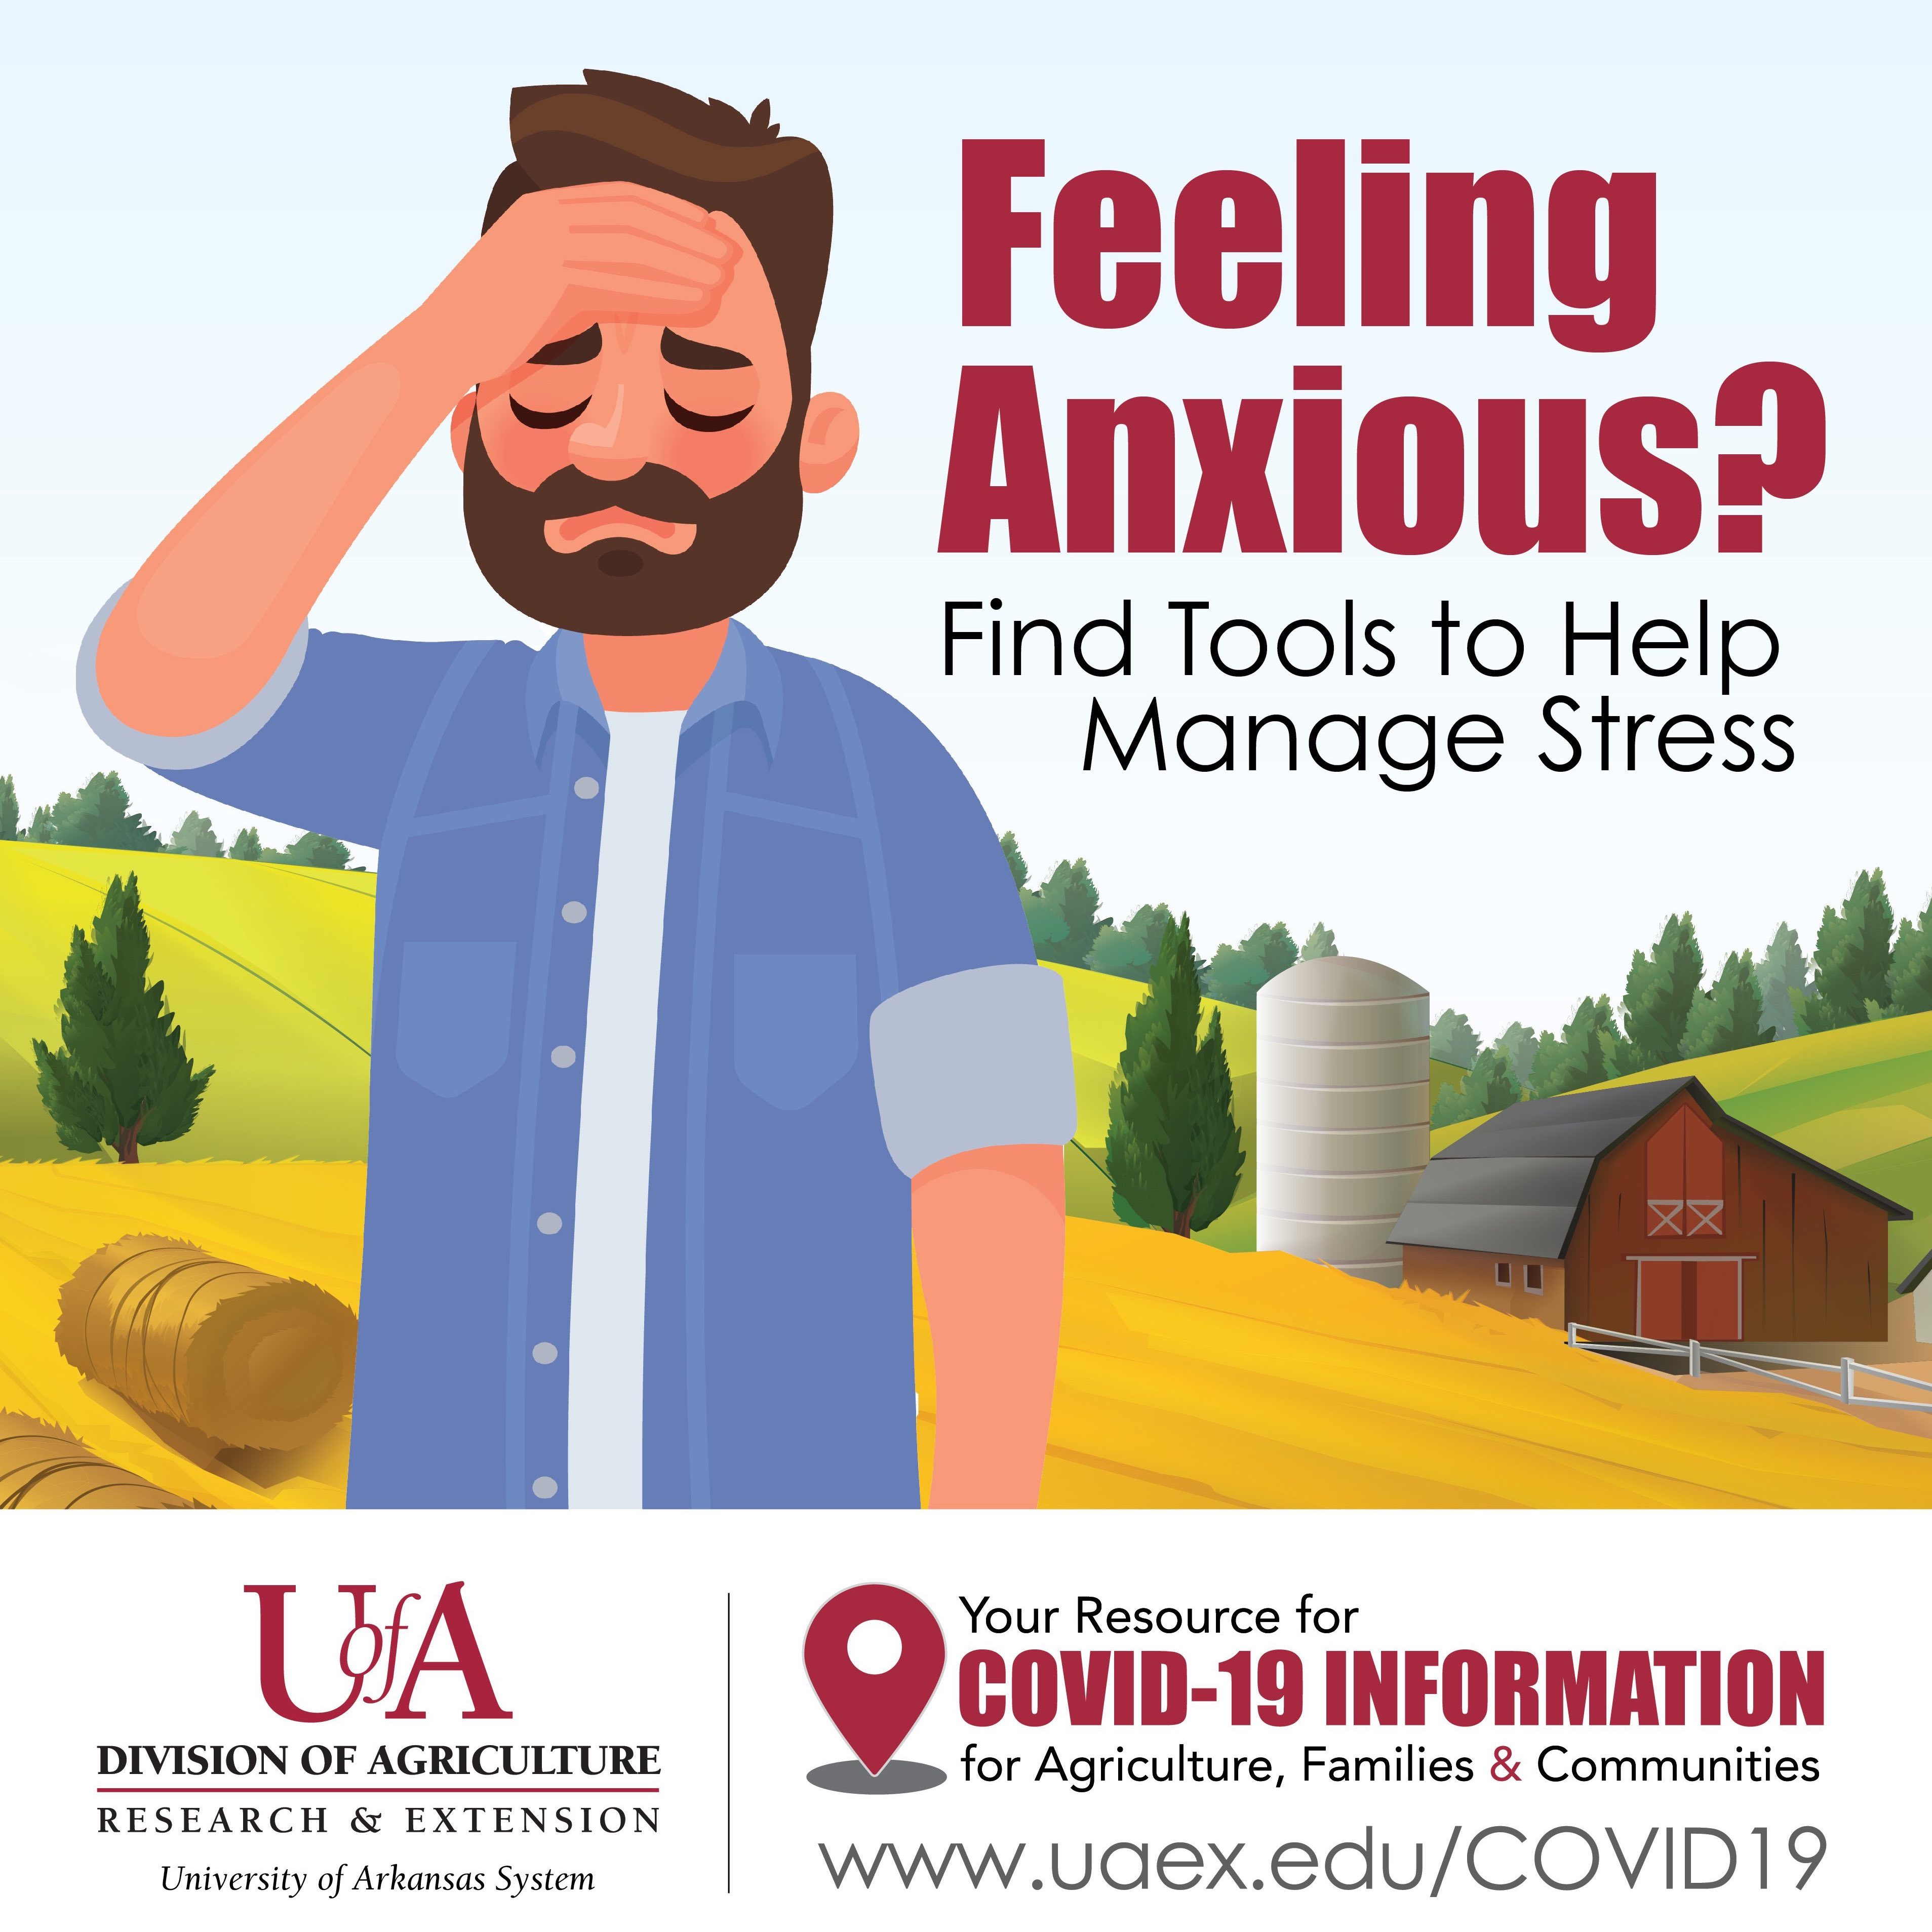 Feeling anxious? Find tools to help manage stress